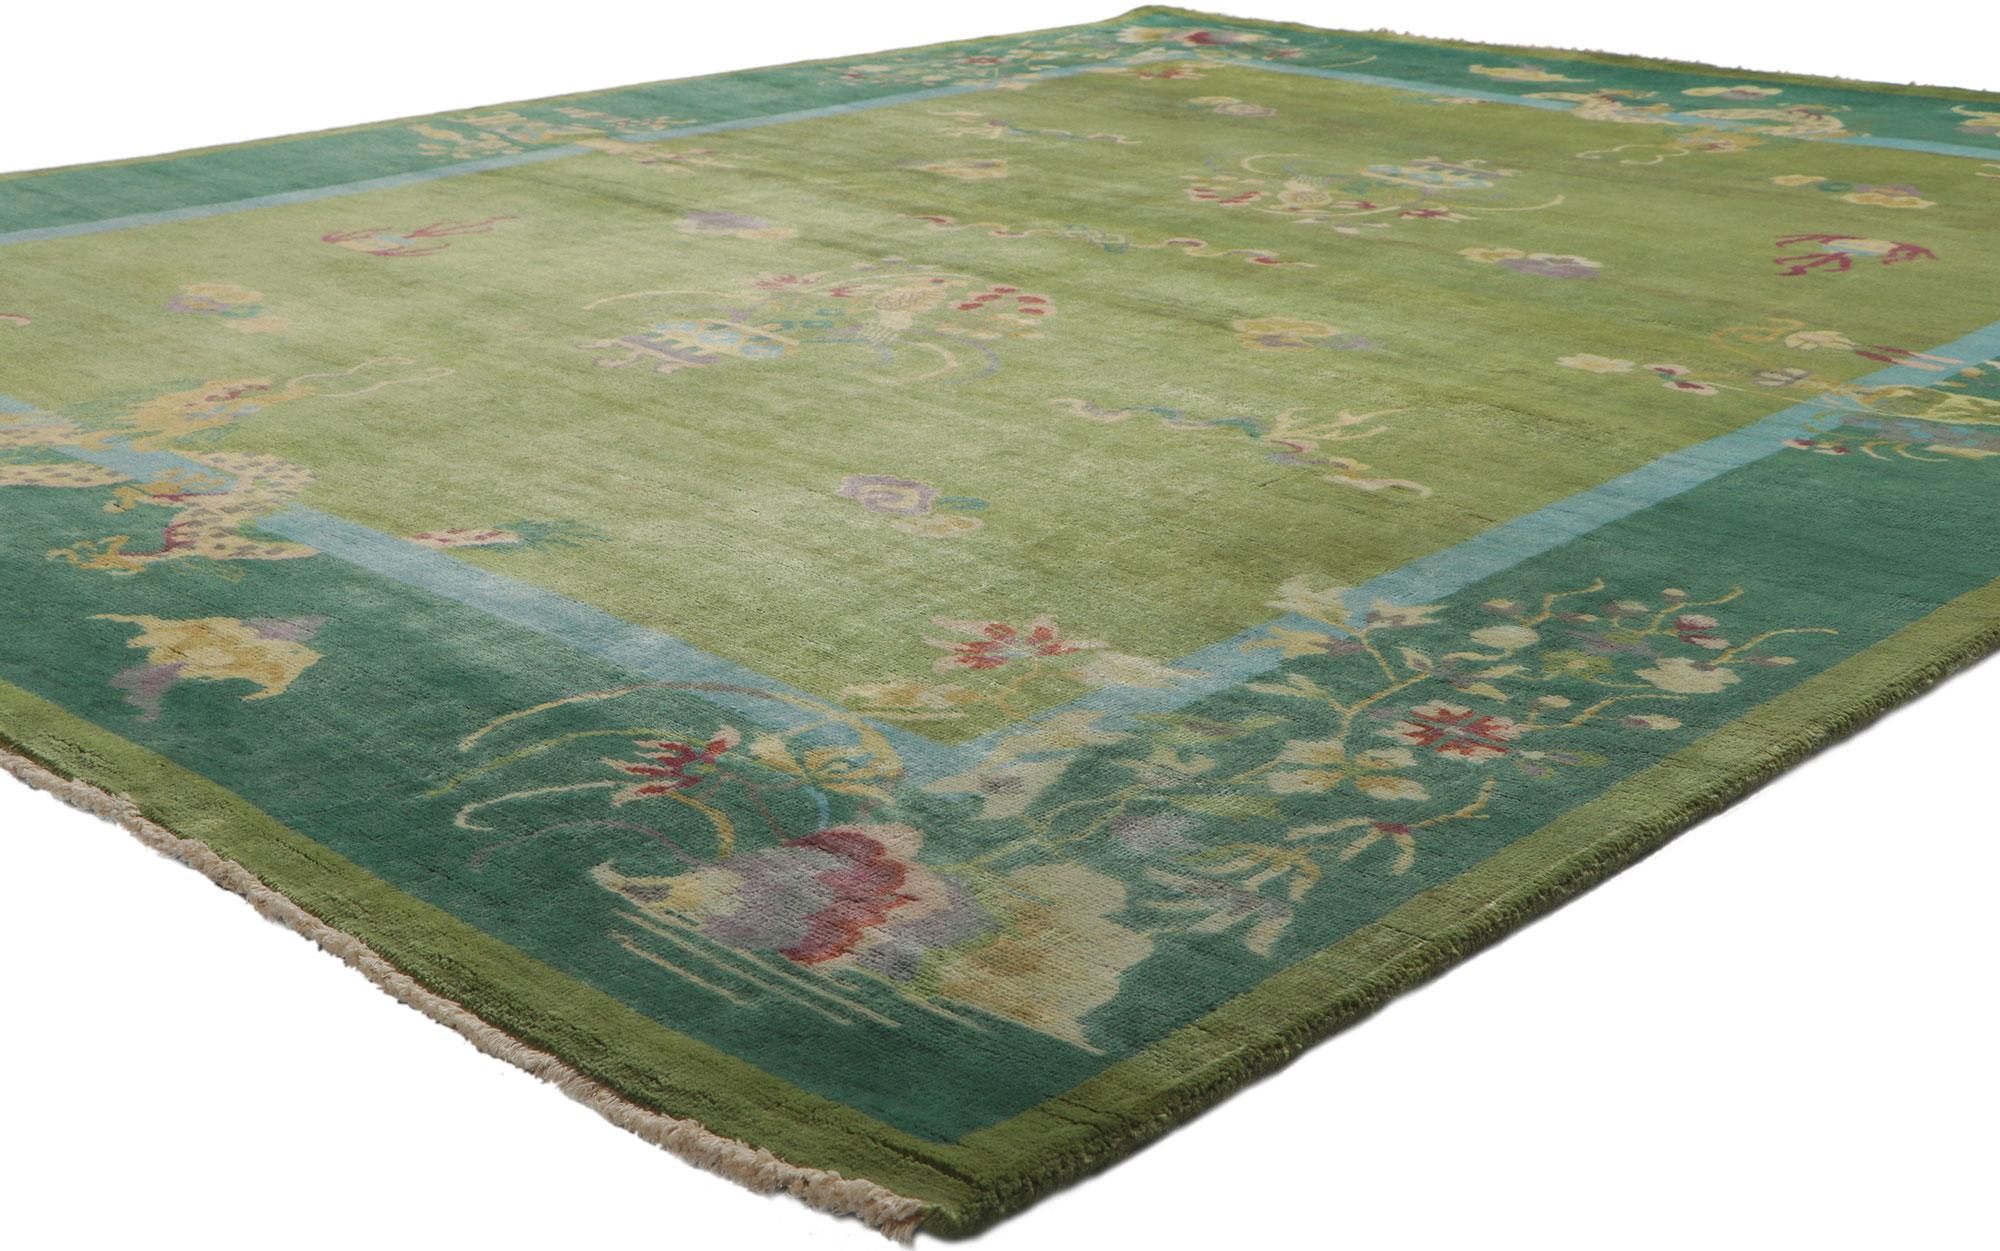 30818 New Chinese Art Deco Style Dragon Pictorial Rug 07'08 x 09'06.
This hand-knotted wool contemporary Chinese Art Deco style rug features a variety of pictorial images overlaid upon an abrashed color-blocked field and border scheme. An array of